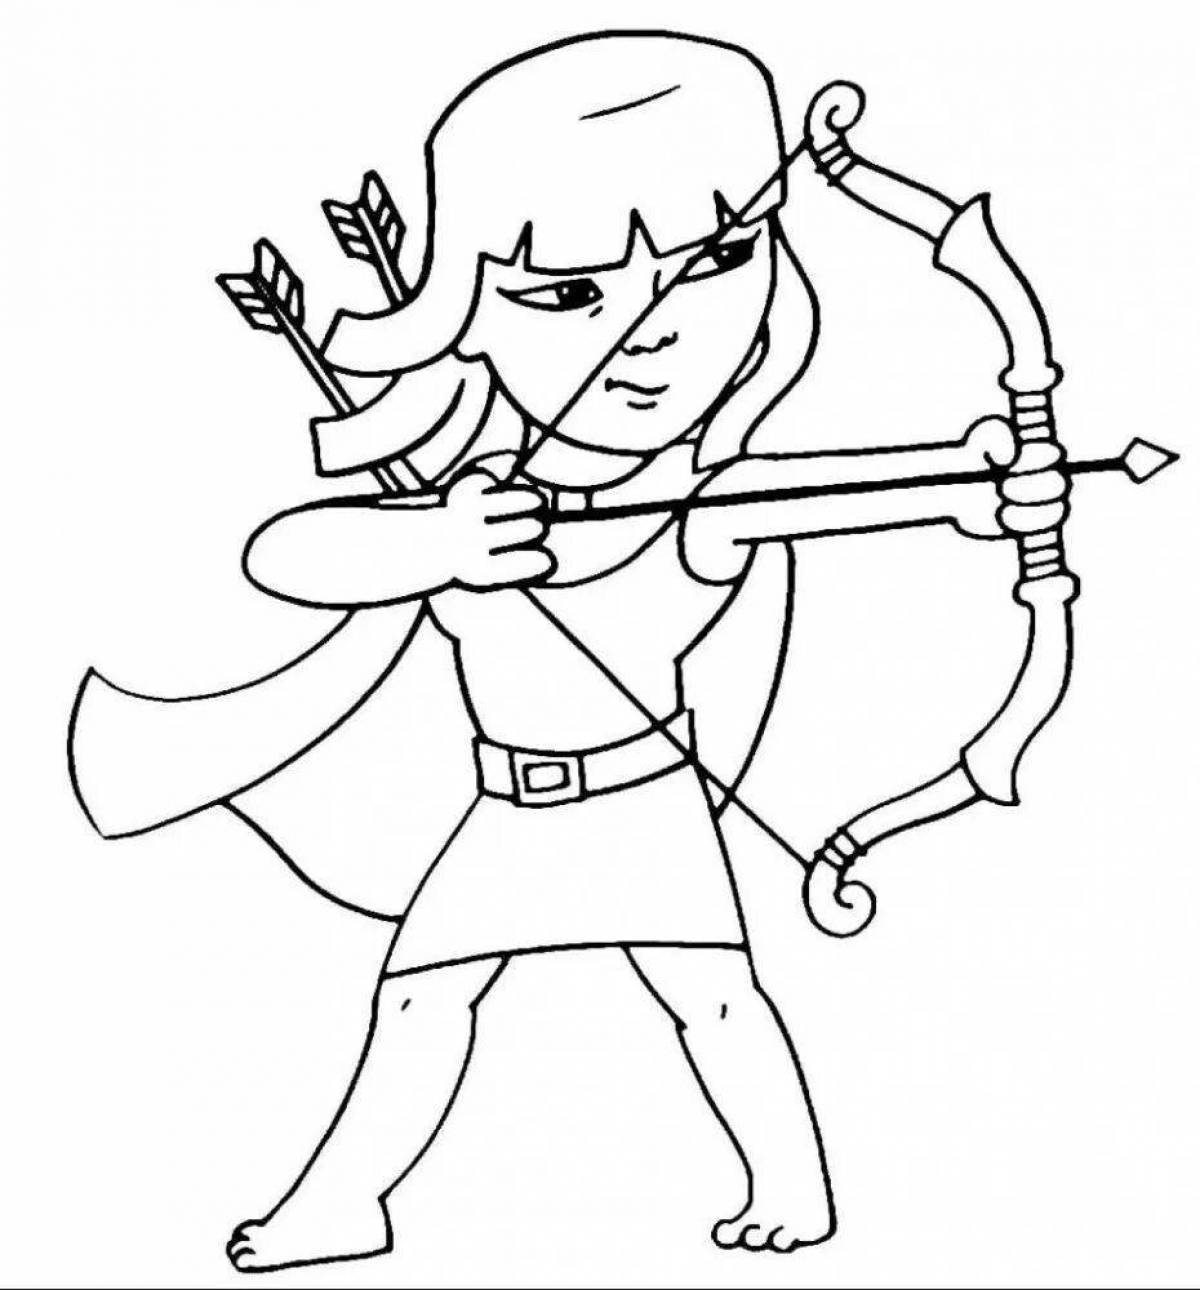 Royal archer coloring page